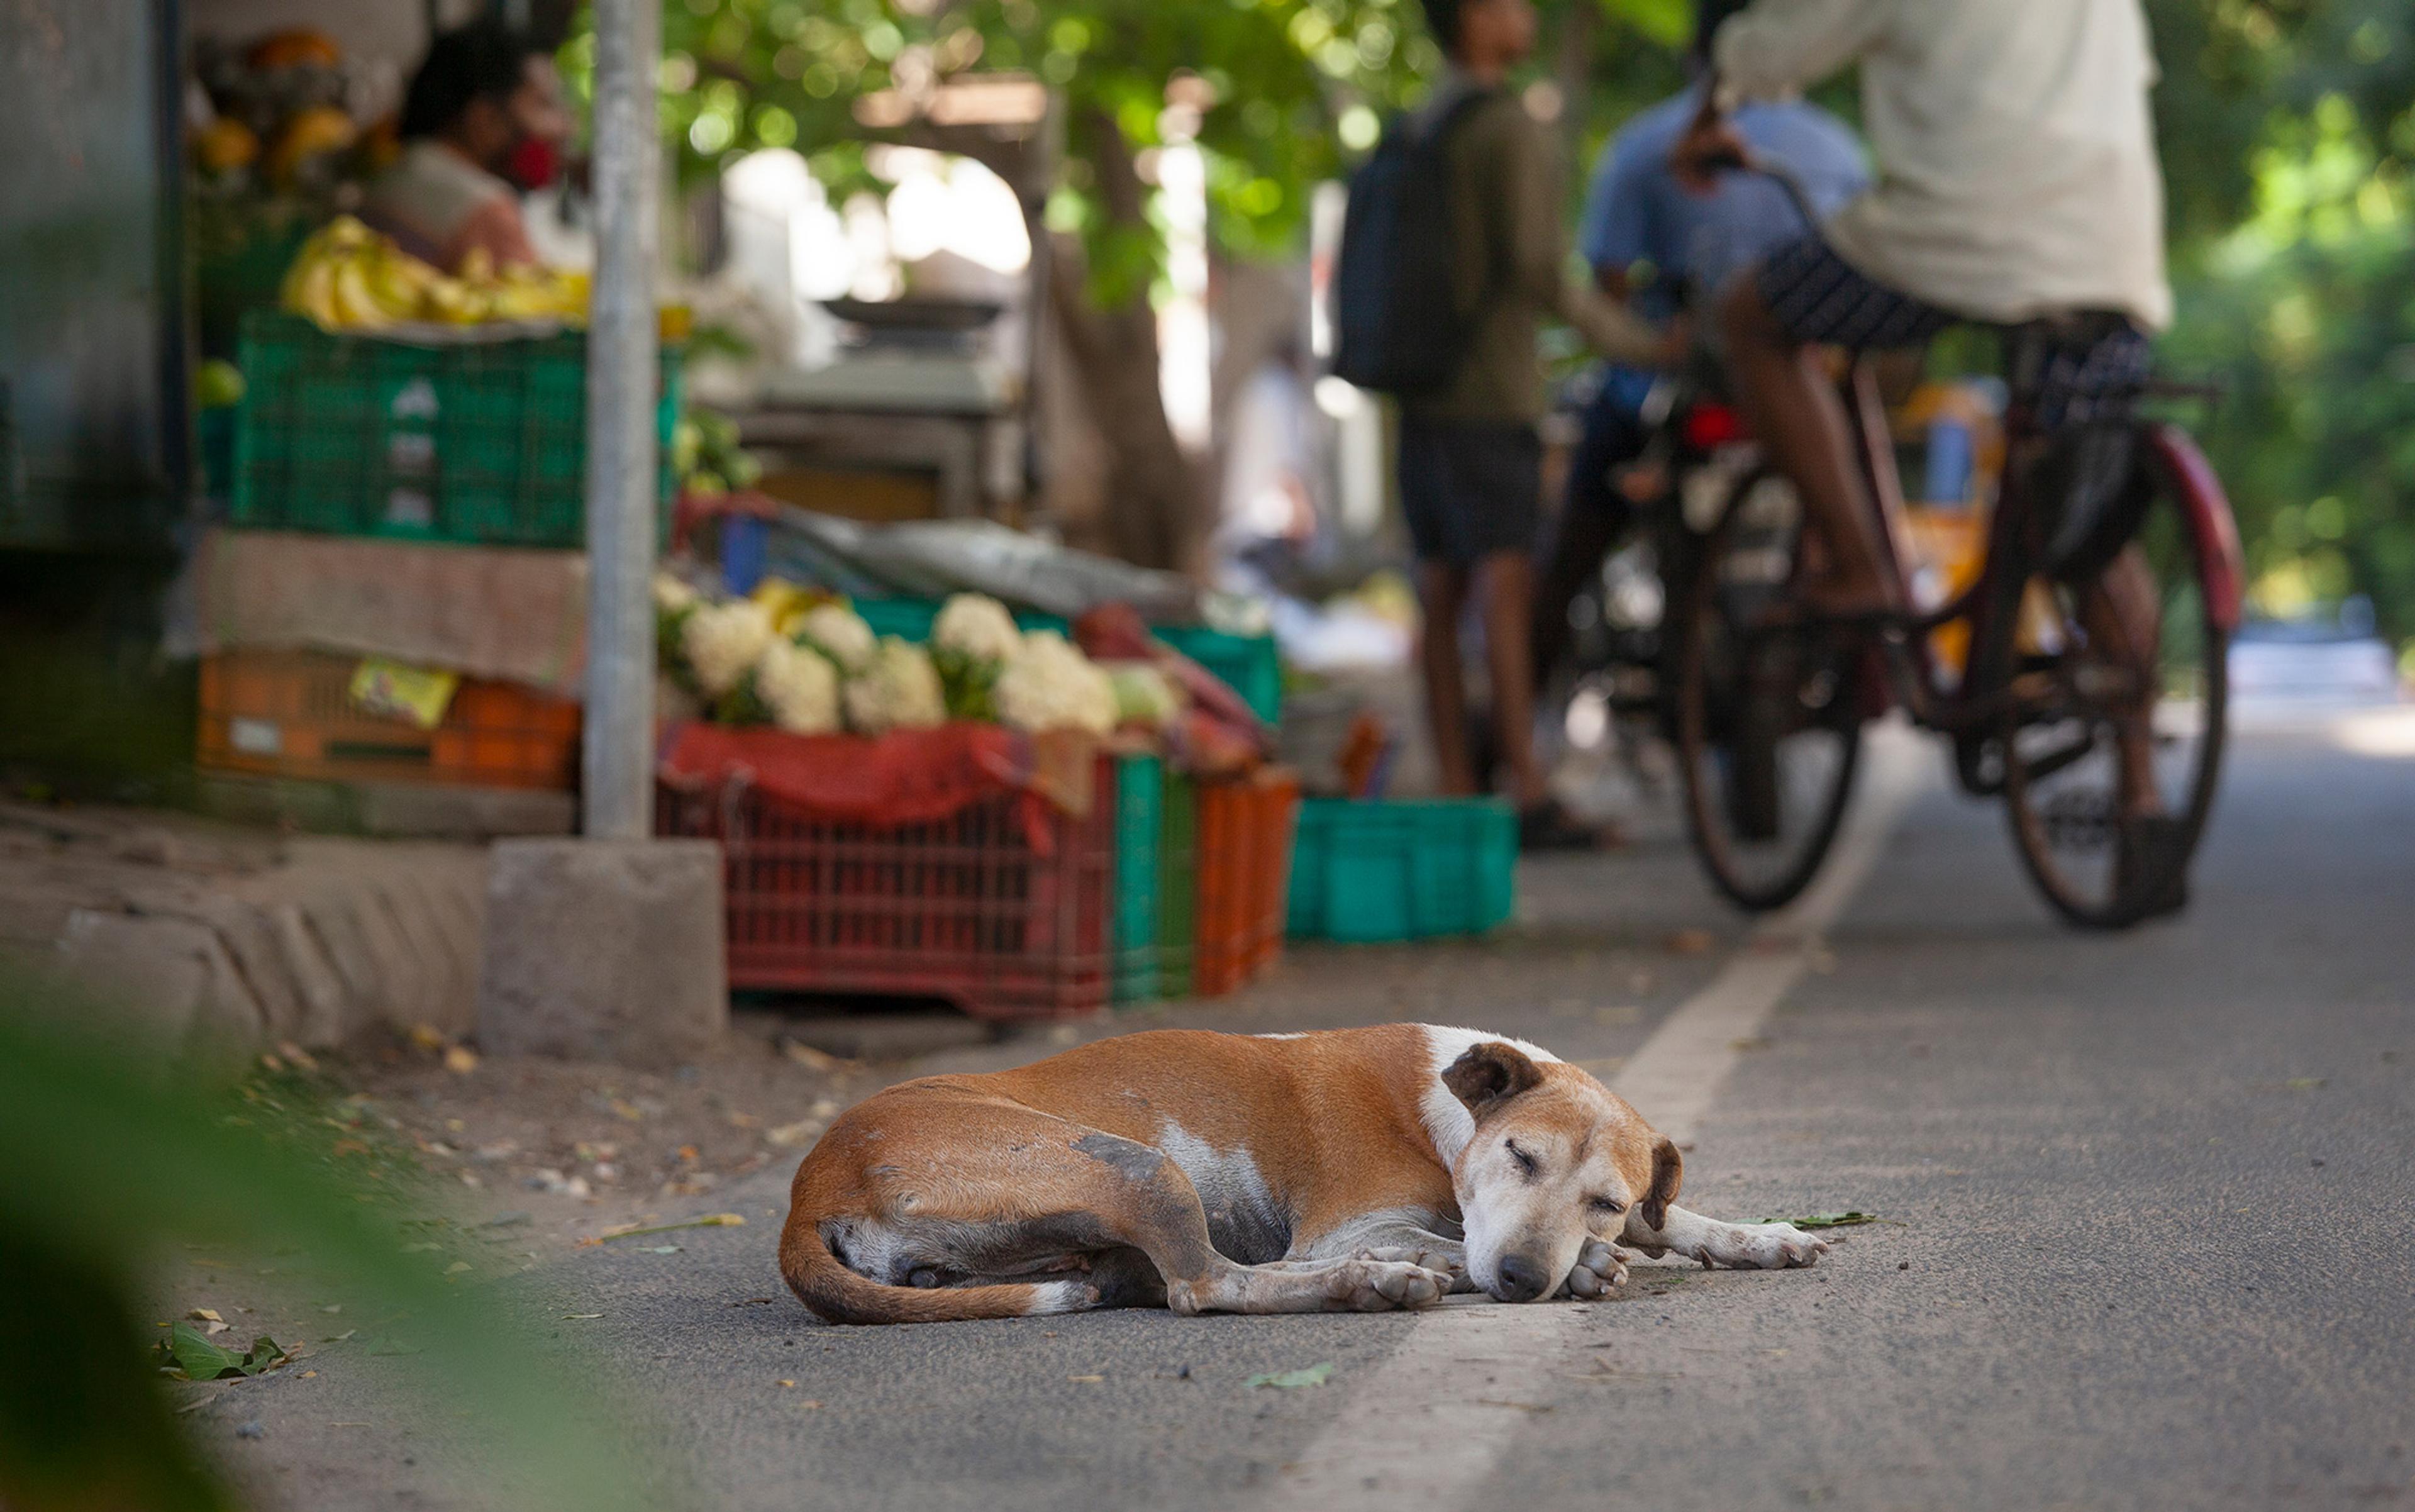 Dogs on India's streets can be freer and happier than many pets